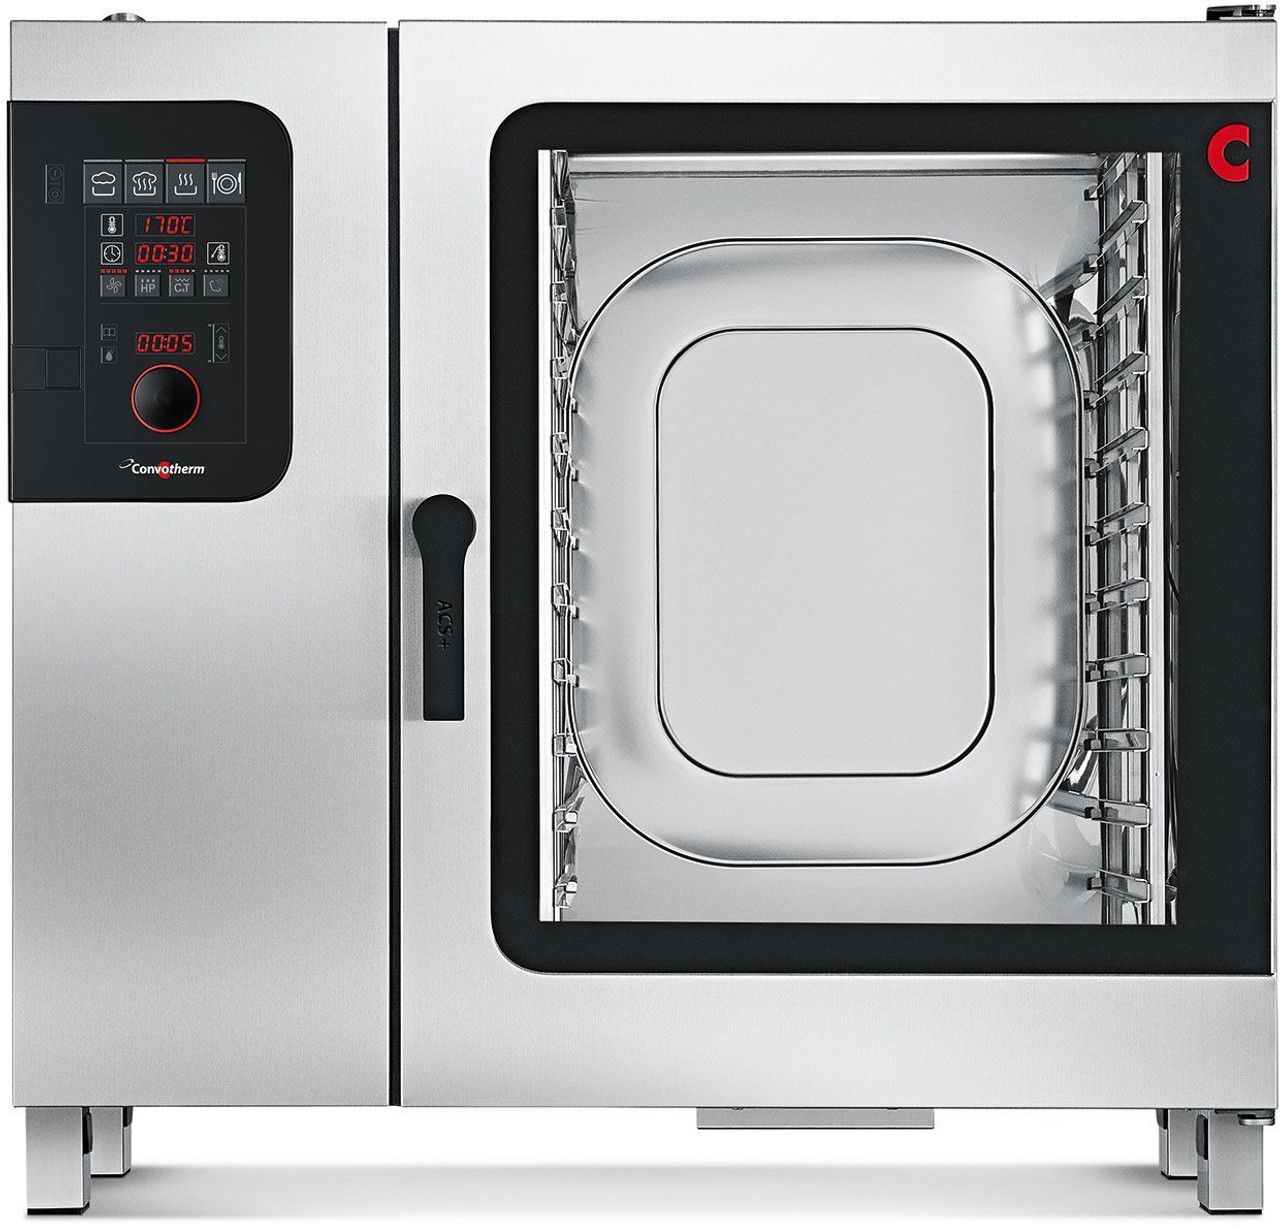 Convotherm C4 ED 10.20GS 10 Full Pan Combi Oven - Gas Fired - Boilerless